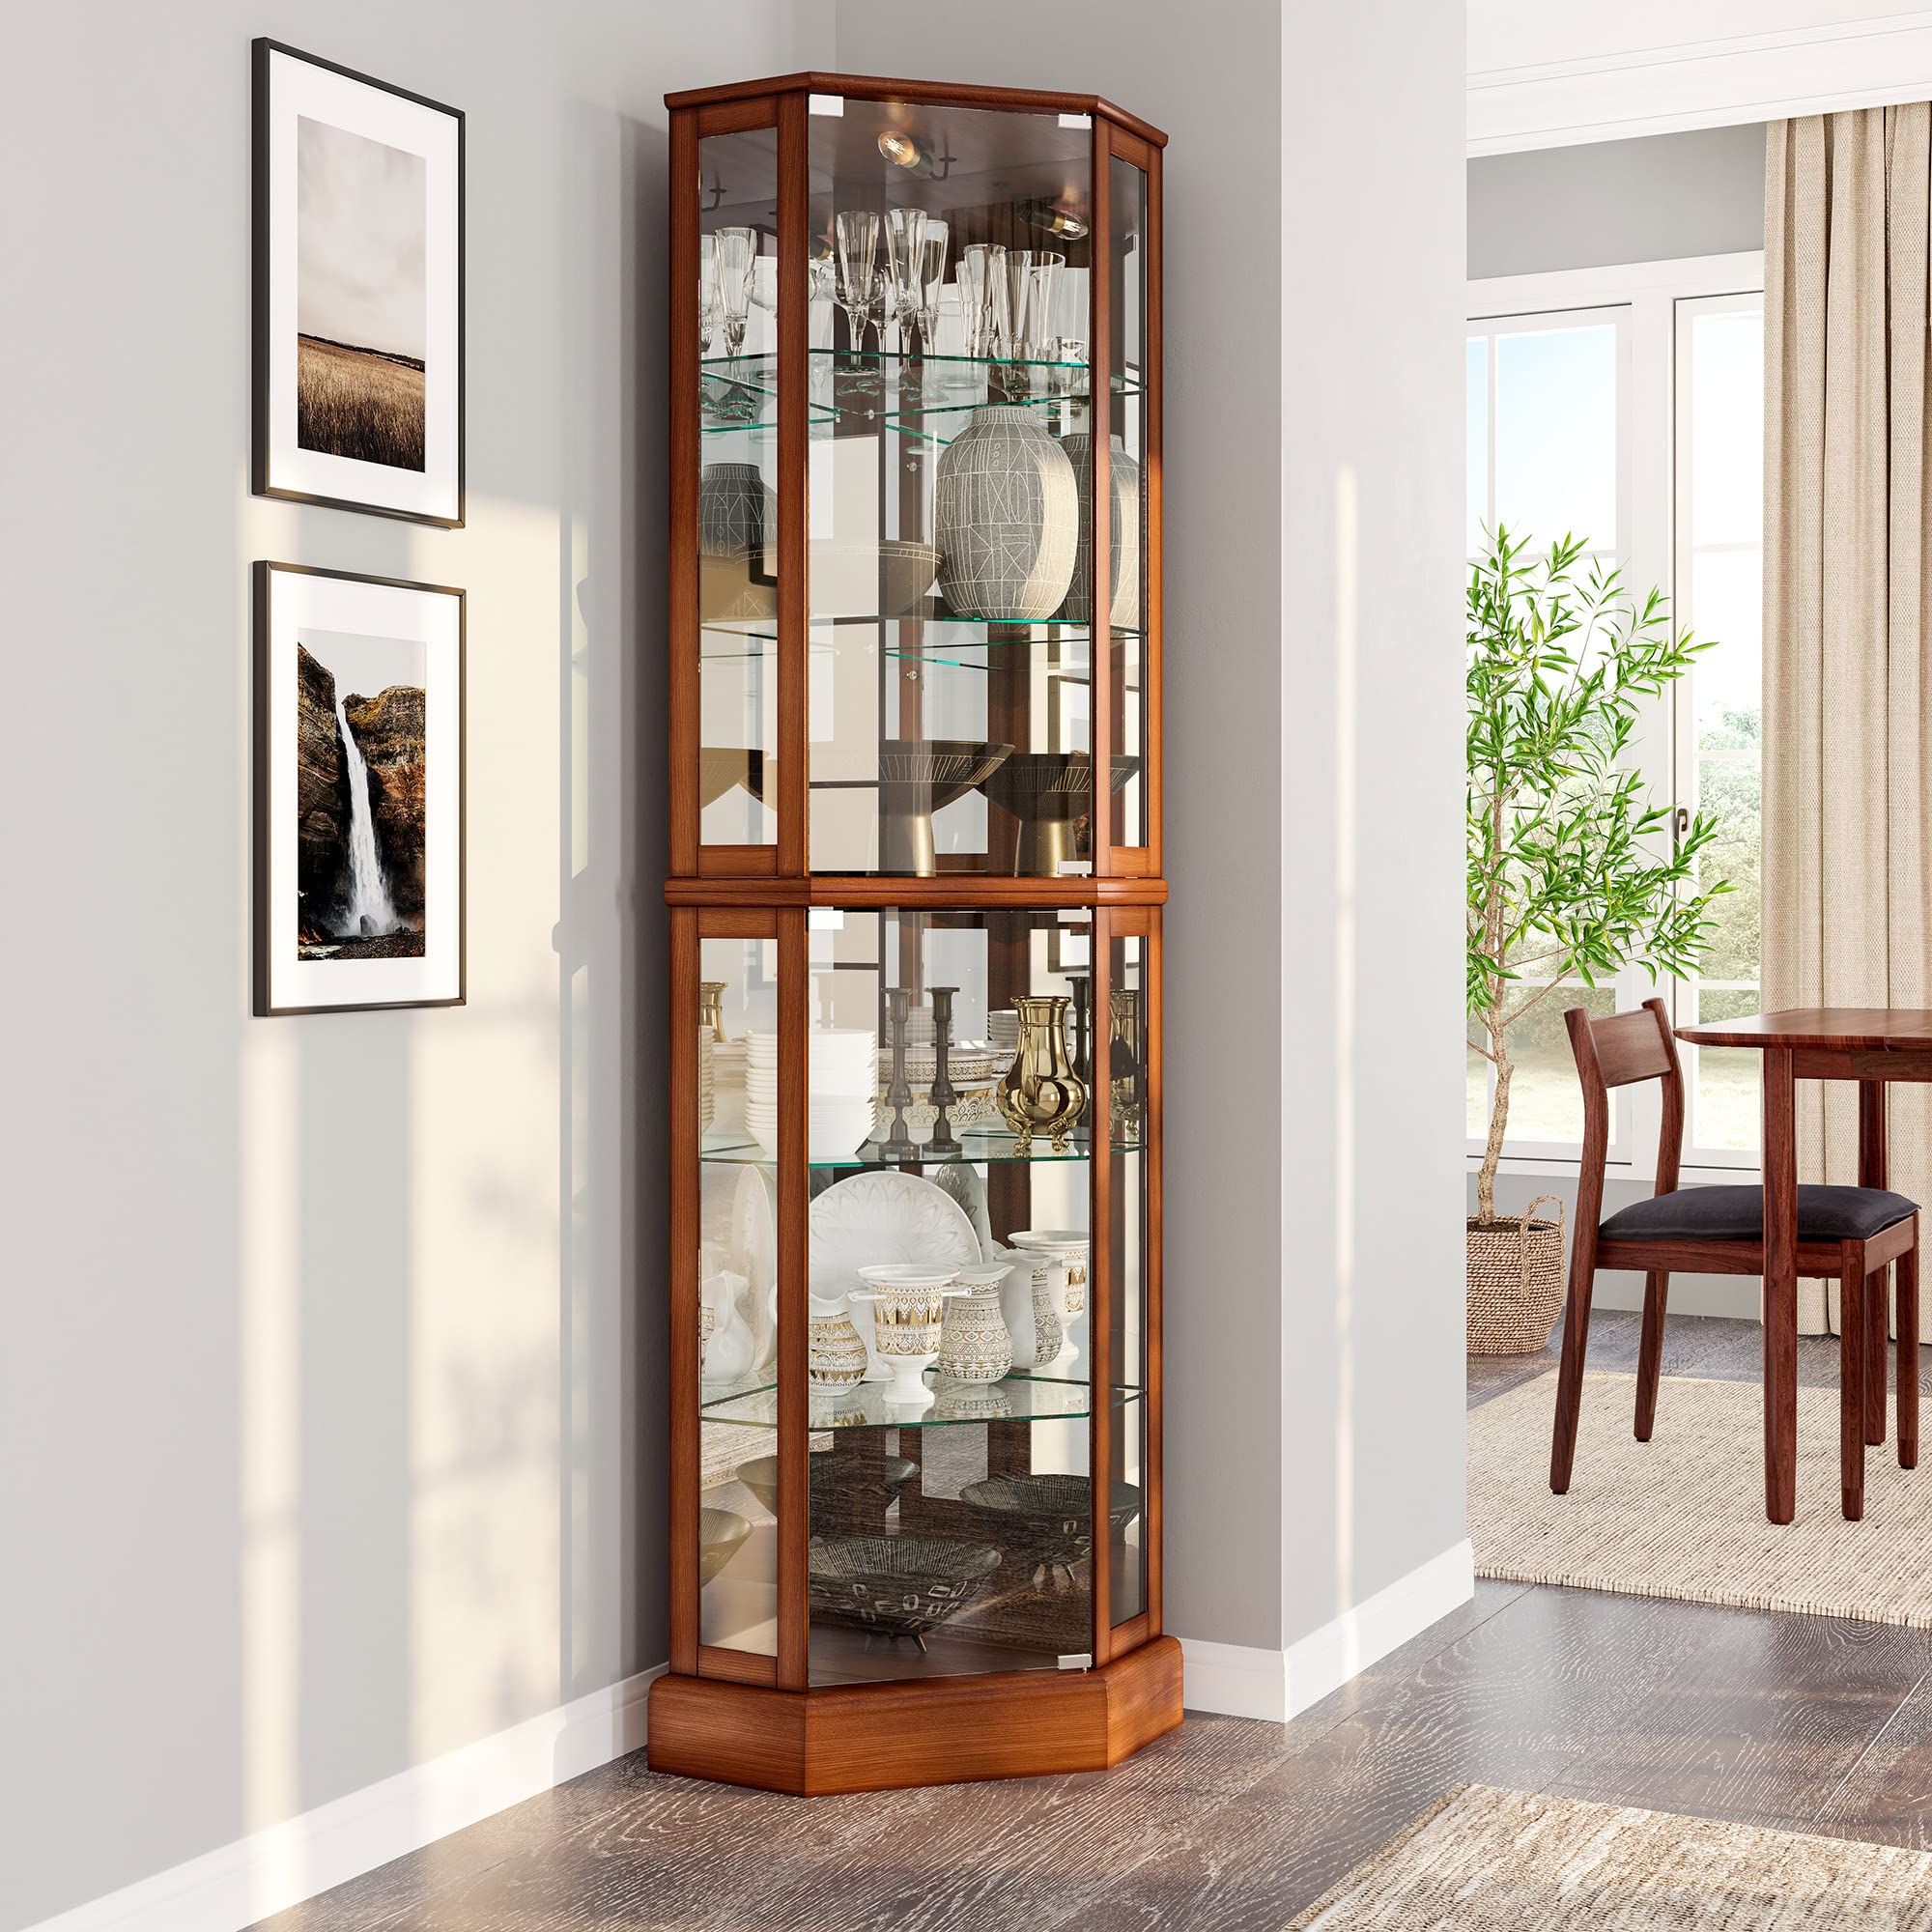 BELLEZE Lighted Curio Cabinet Corner Display Case for Living Room, China Hutch with Tempered Glass Doors and Shelves, Wooden Accent Cabinet, Bar and Liquor Storage Area - Ashfield (Oak)